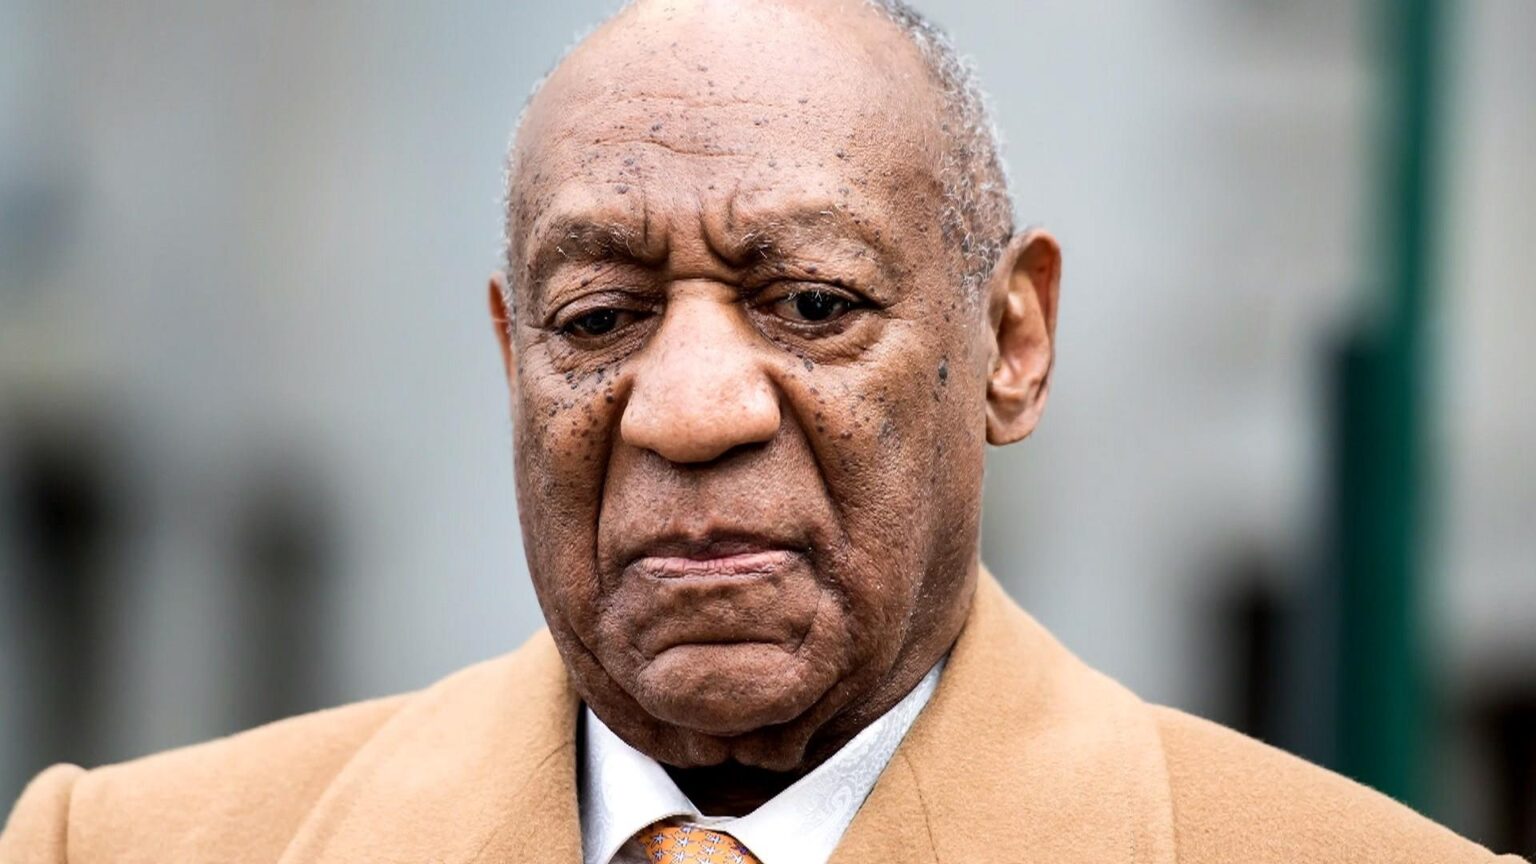 Bill Cosby has officially been released from prison after only two years. Just what might the disgraced comedian do now that he's free?